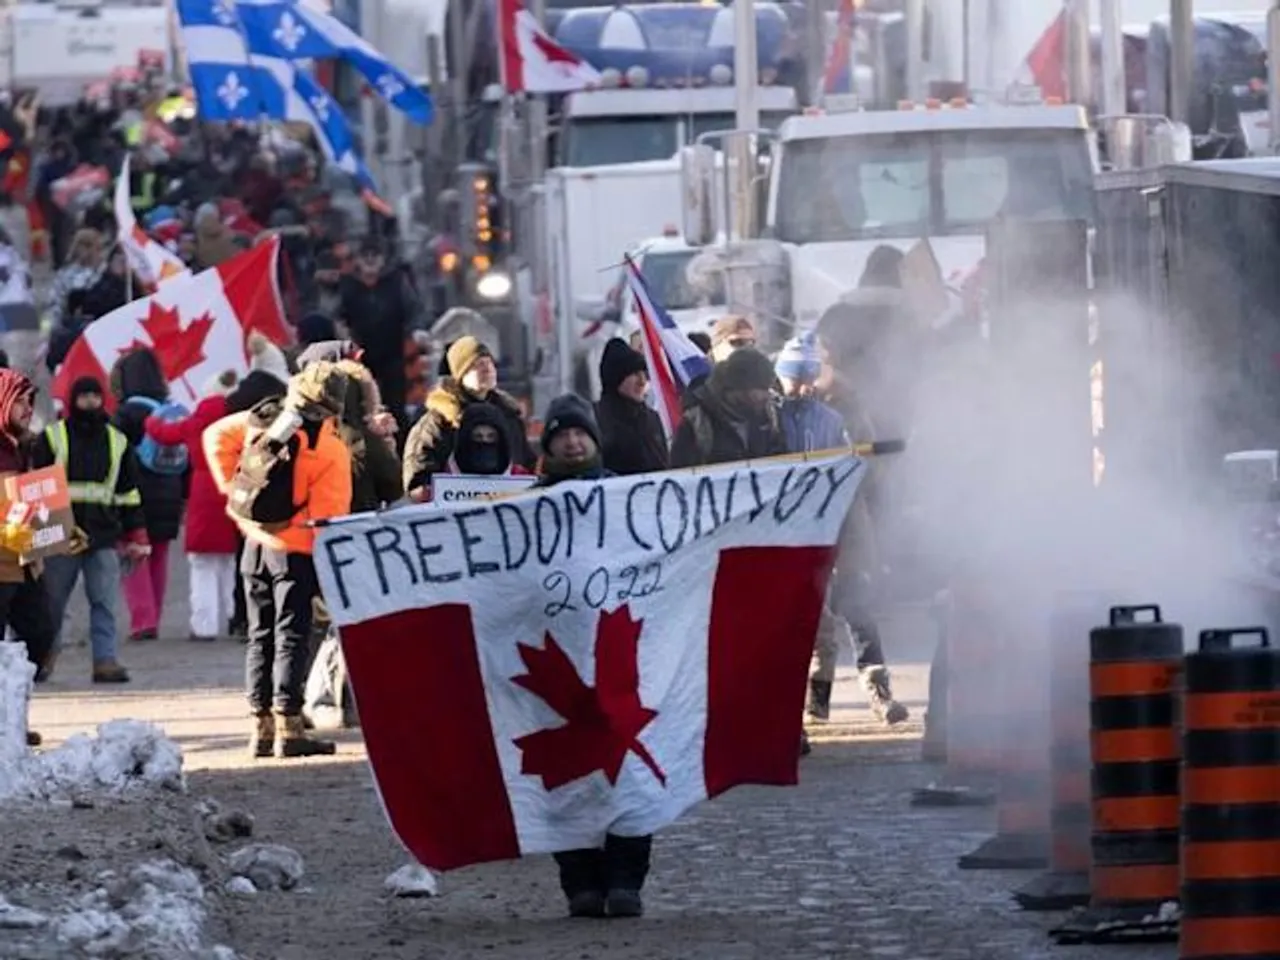 THOUSANDS OF VEHICLES, PEDESTRIANS ARIVE WITH TRUCK CONVOY IN OTTAWA.